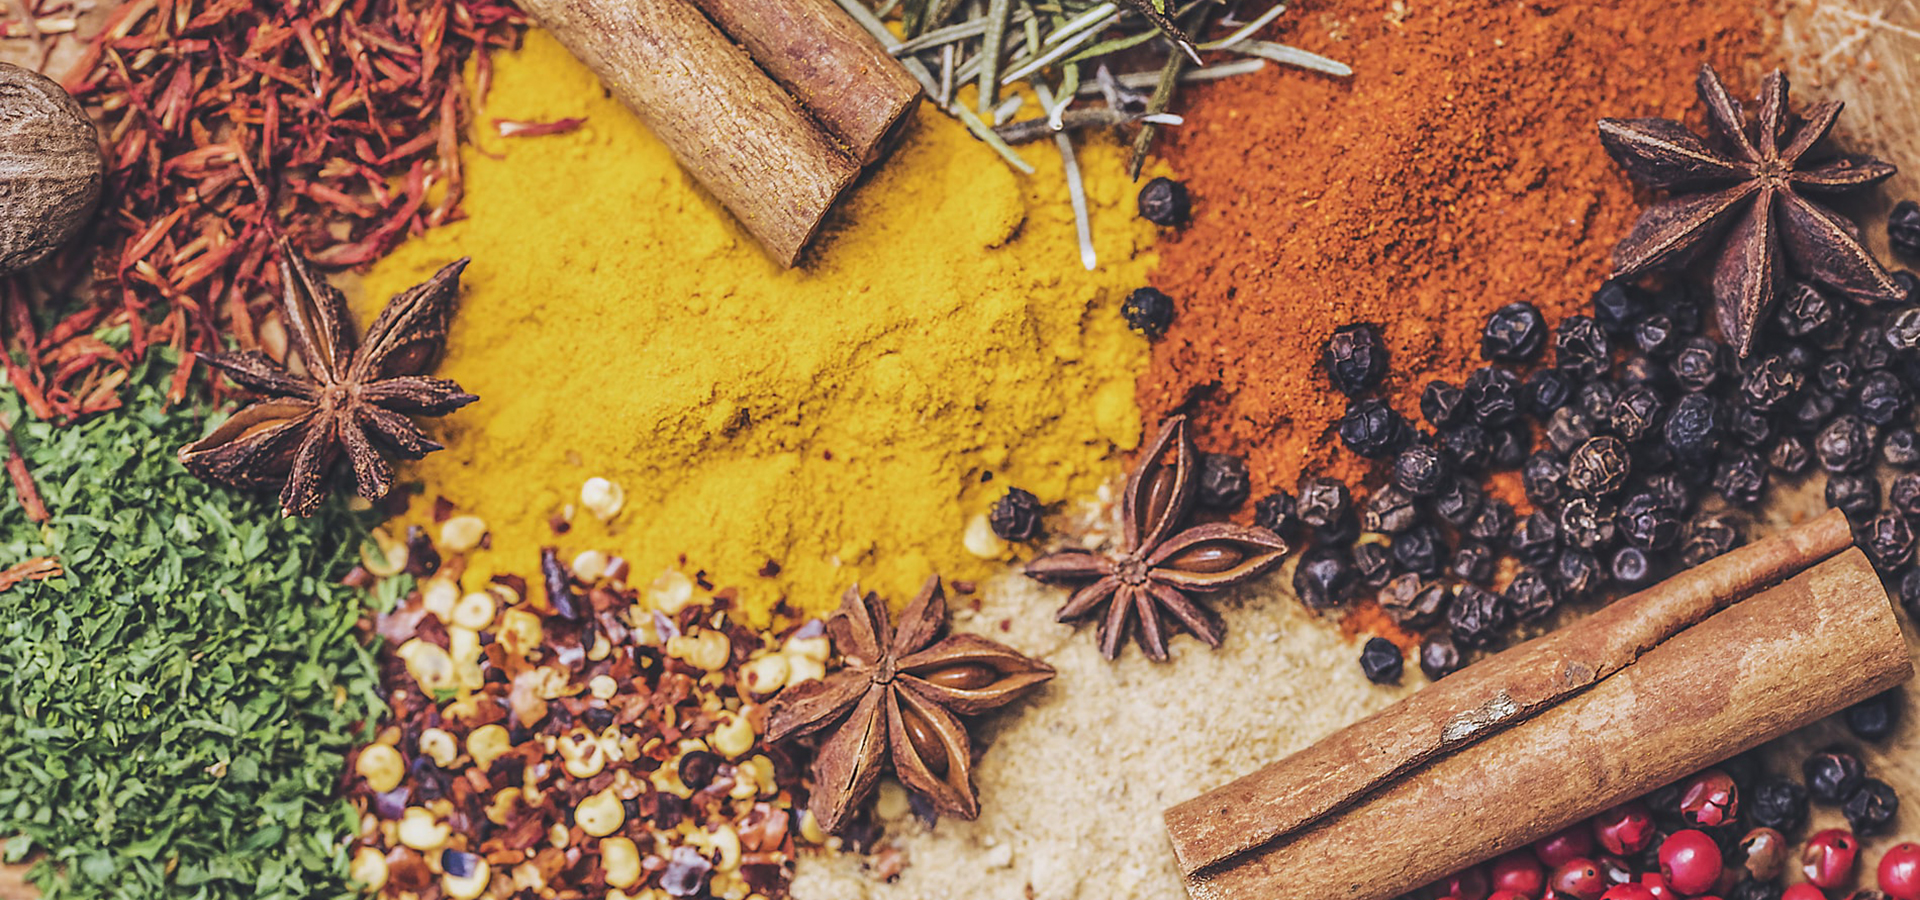 Cooking Essentials: 6 Spices To Boost Your Health